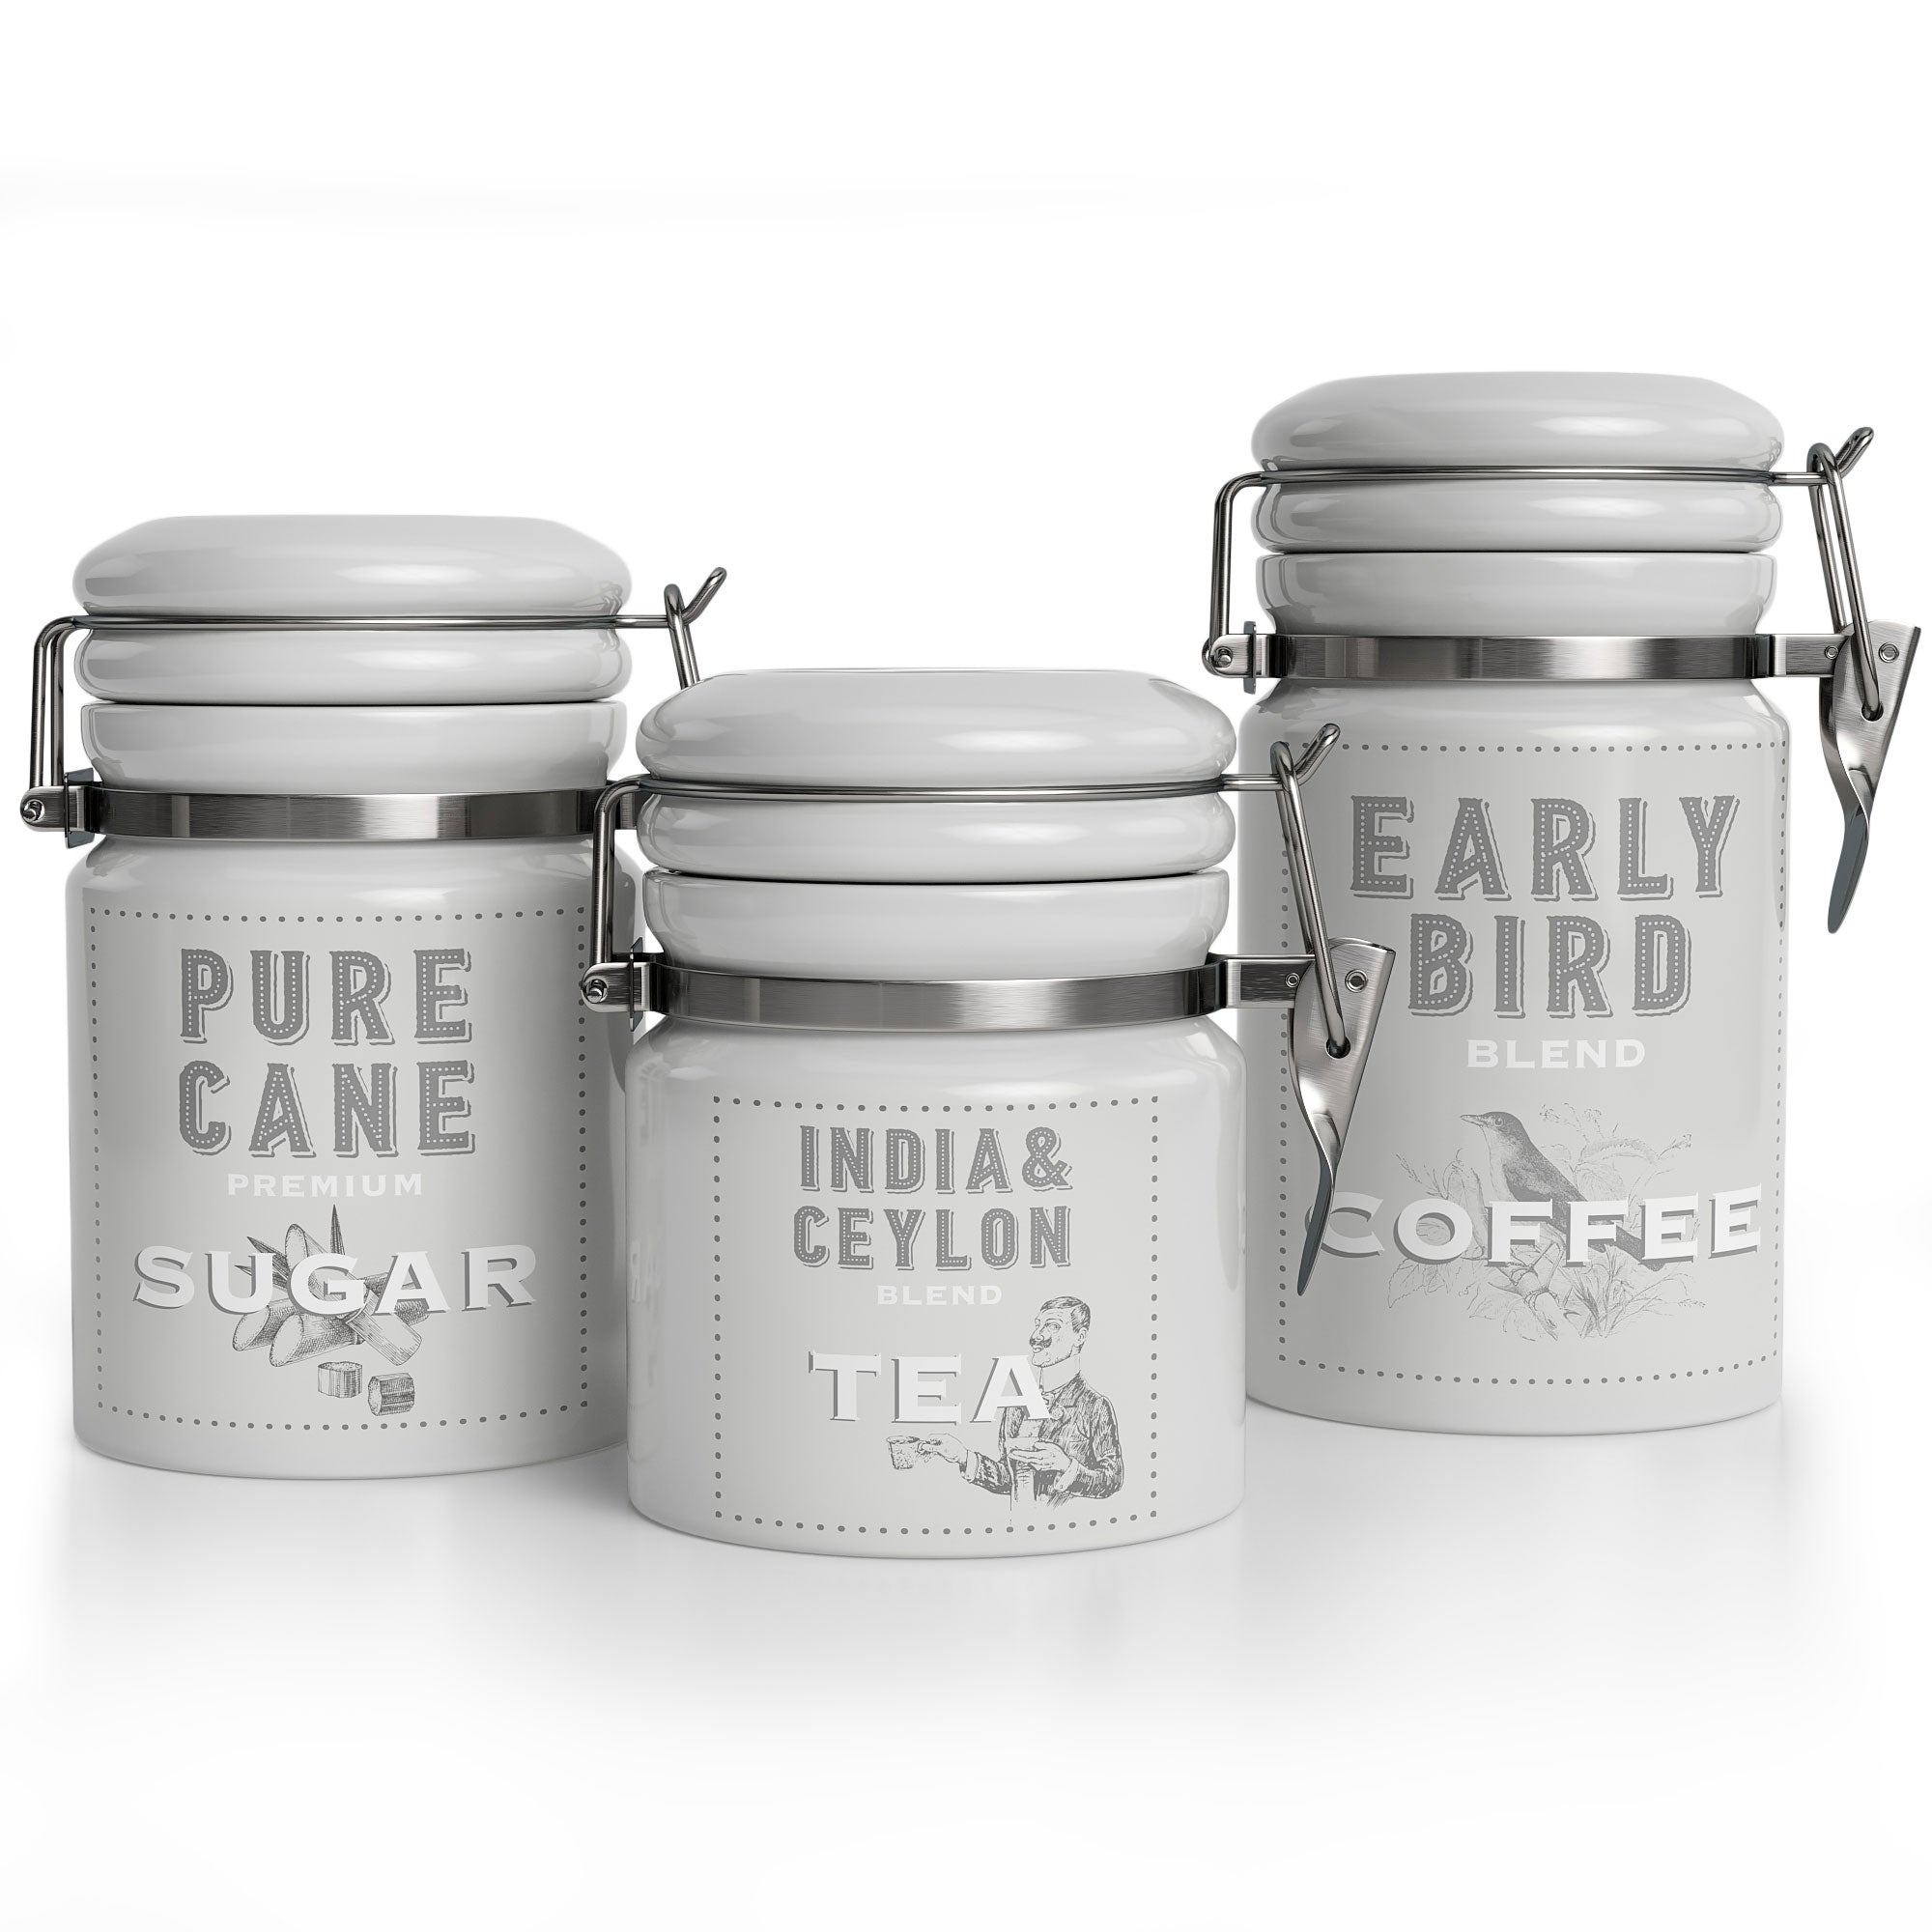 Barnyard Designs Kitchen Canister Set, Ceramic Canisters with Lid